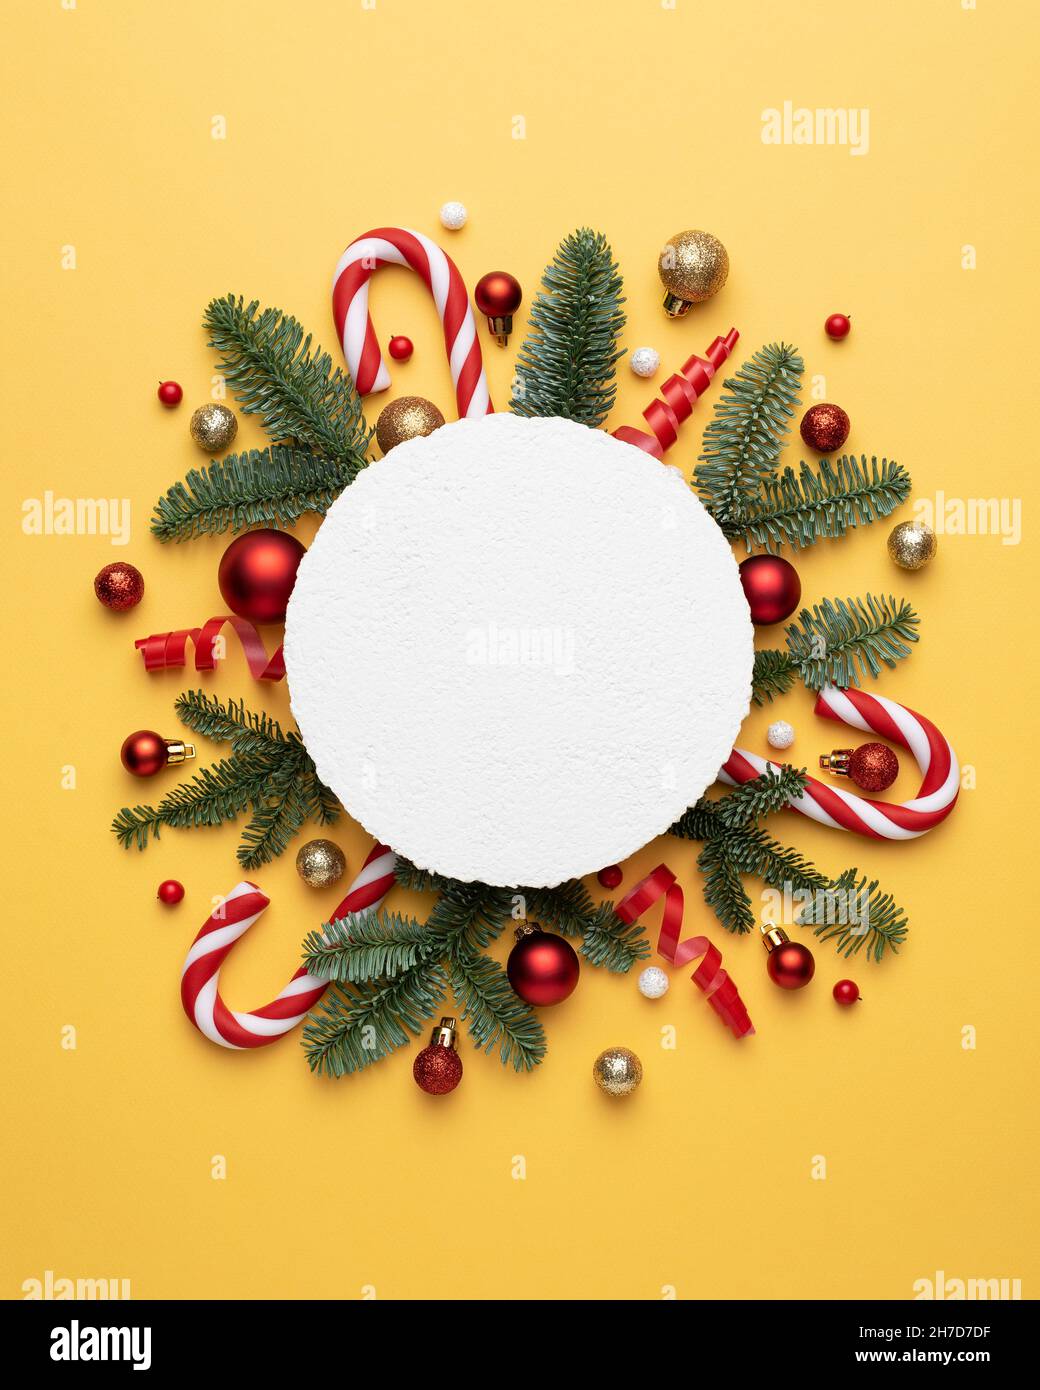 Christmas card with holiday decorations and frame for text on yellow background Stock Photo